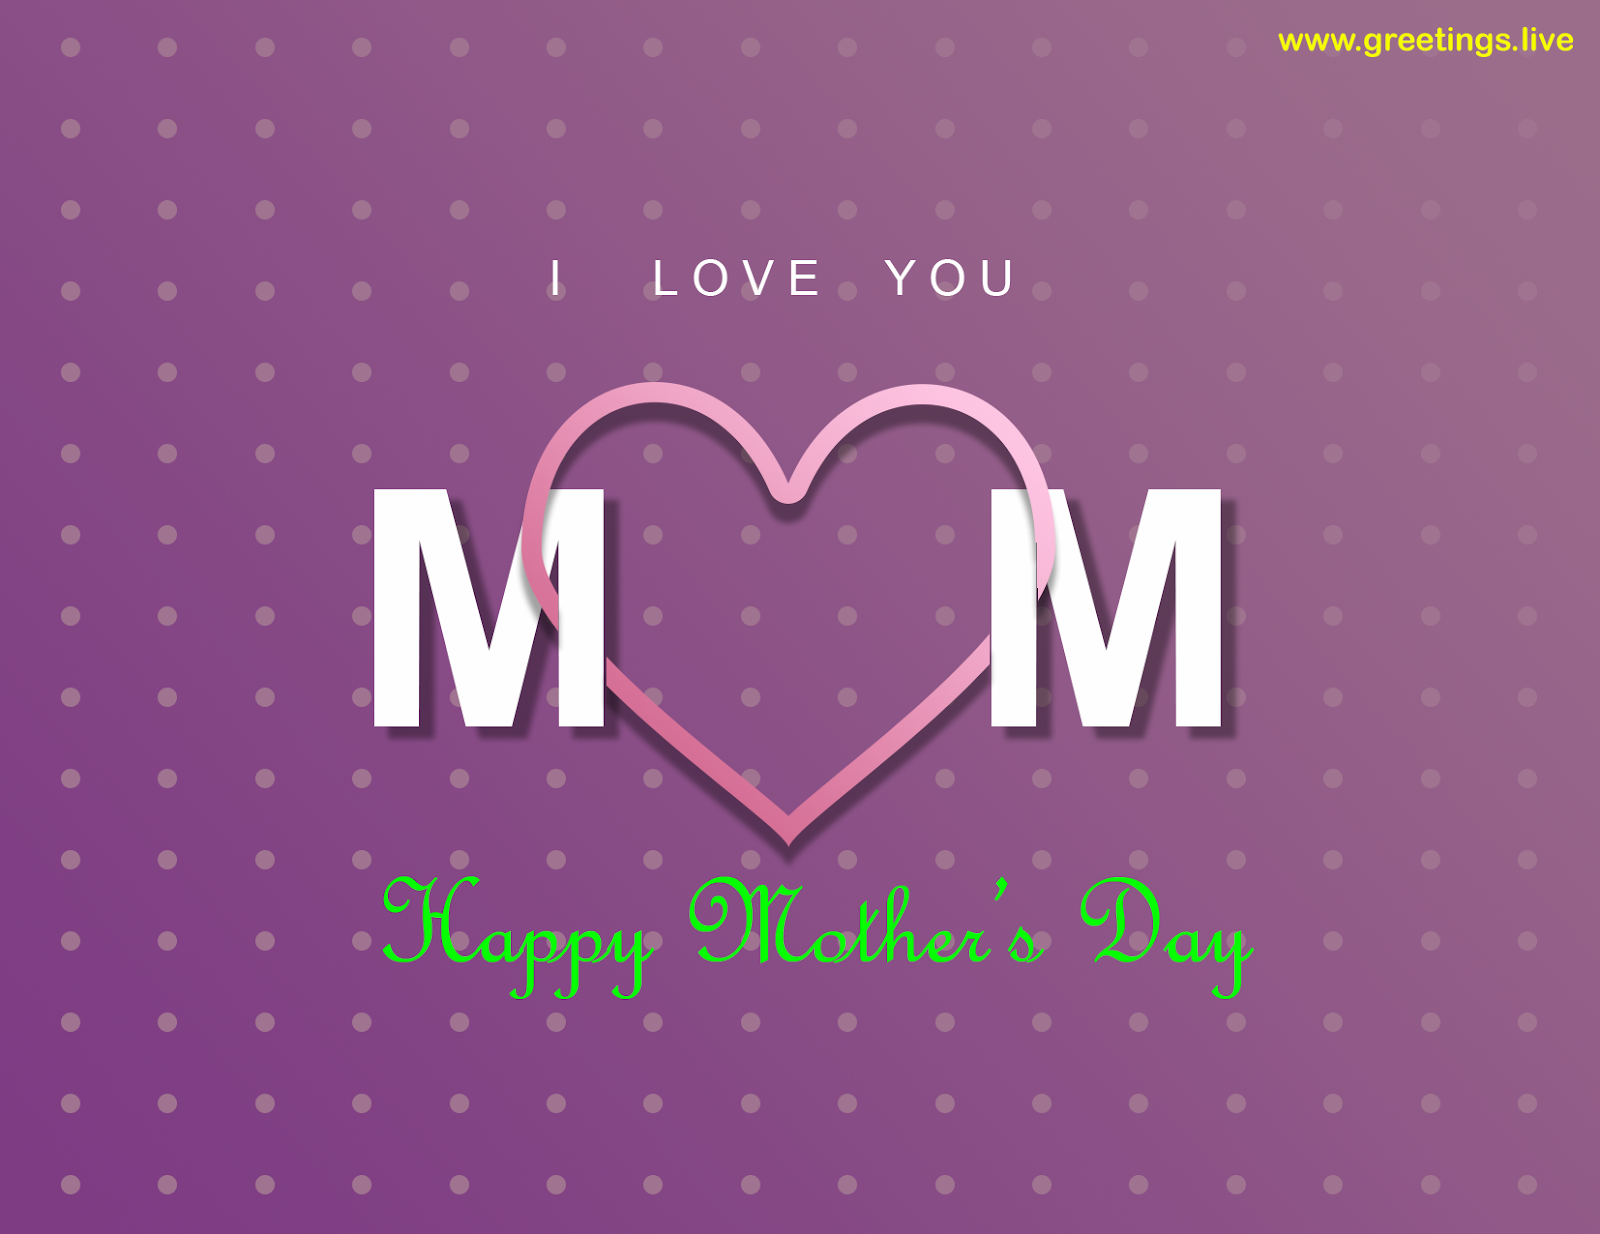 Greetings Live Free Daily Greetings Pictures Festival Gif Images I Love You Mom Mother S Day 19 Greetings Card